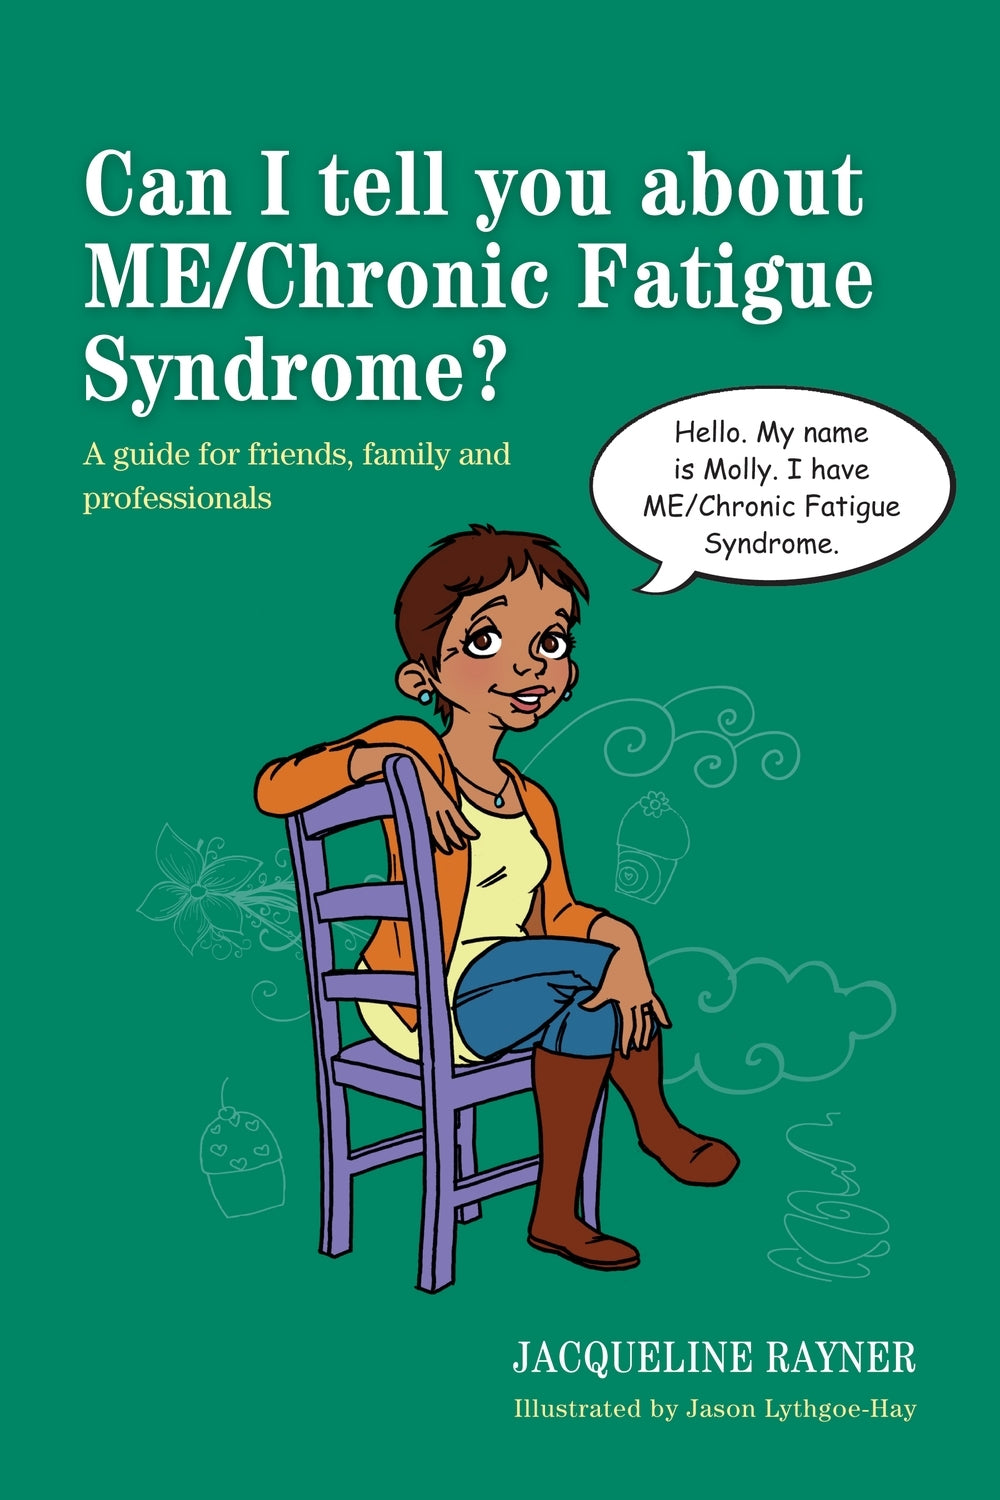 Can I tell you about ME/Chronic Fatigue Syndrome? by Jacqueline Rayner, Jason Lythgoe-Hay